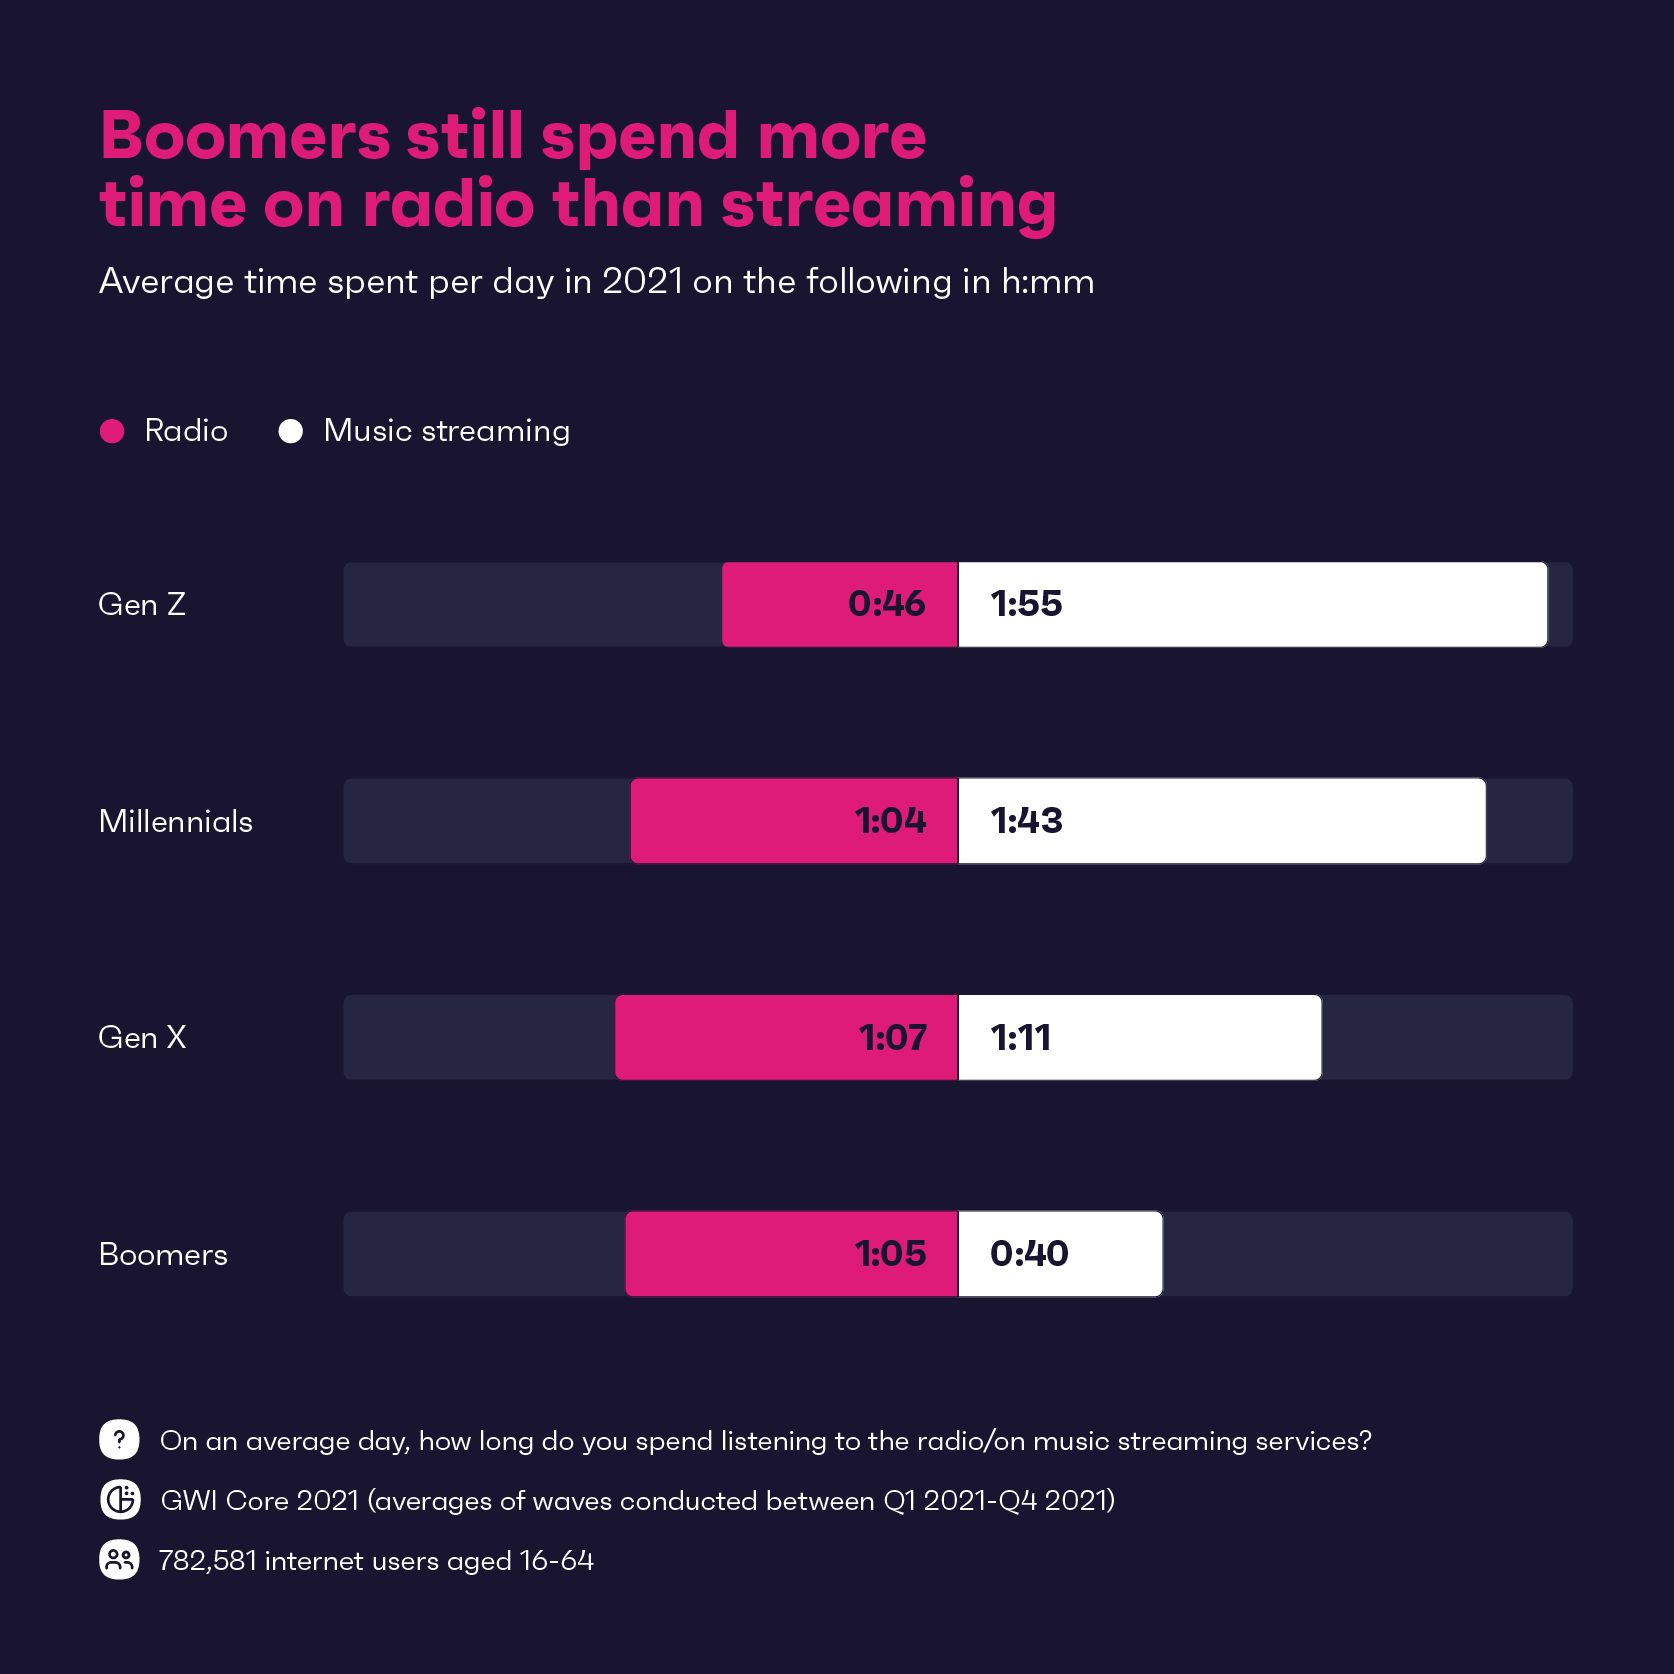 Boomers still spend more time on radio than streaming